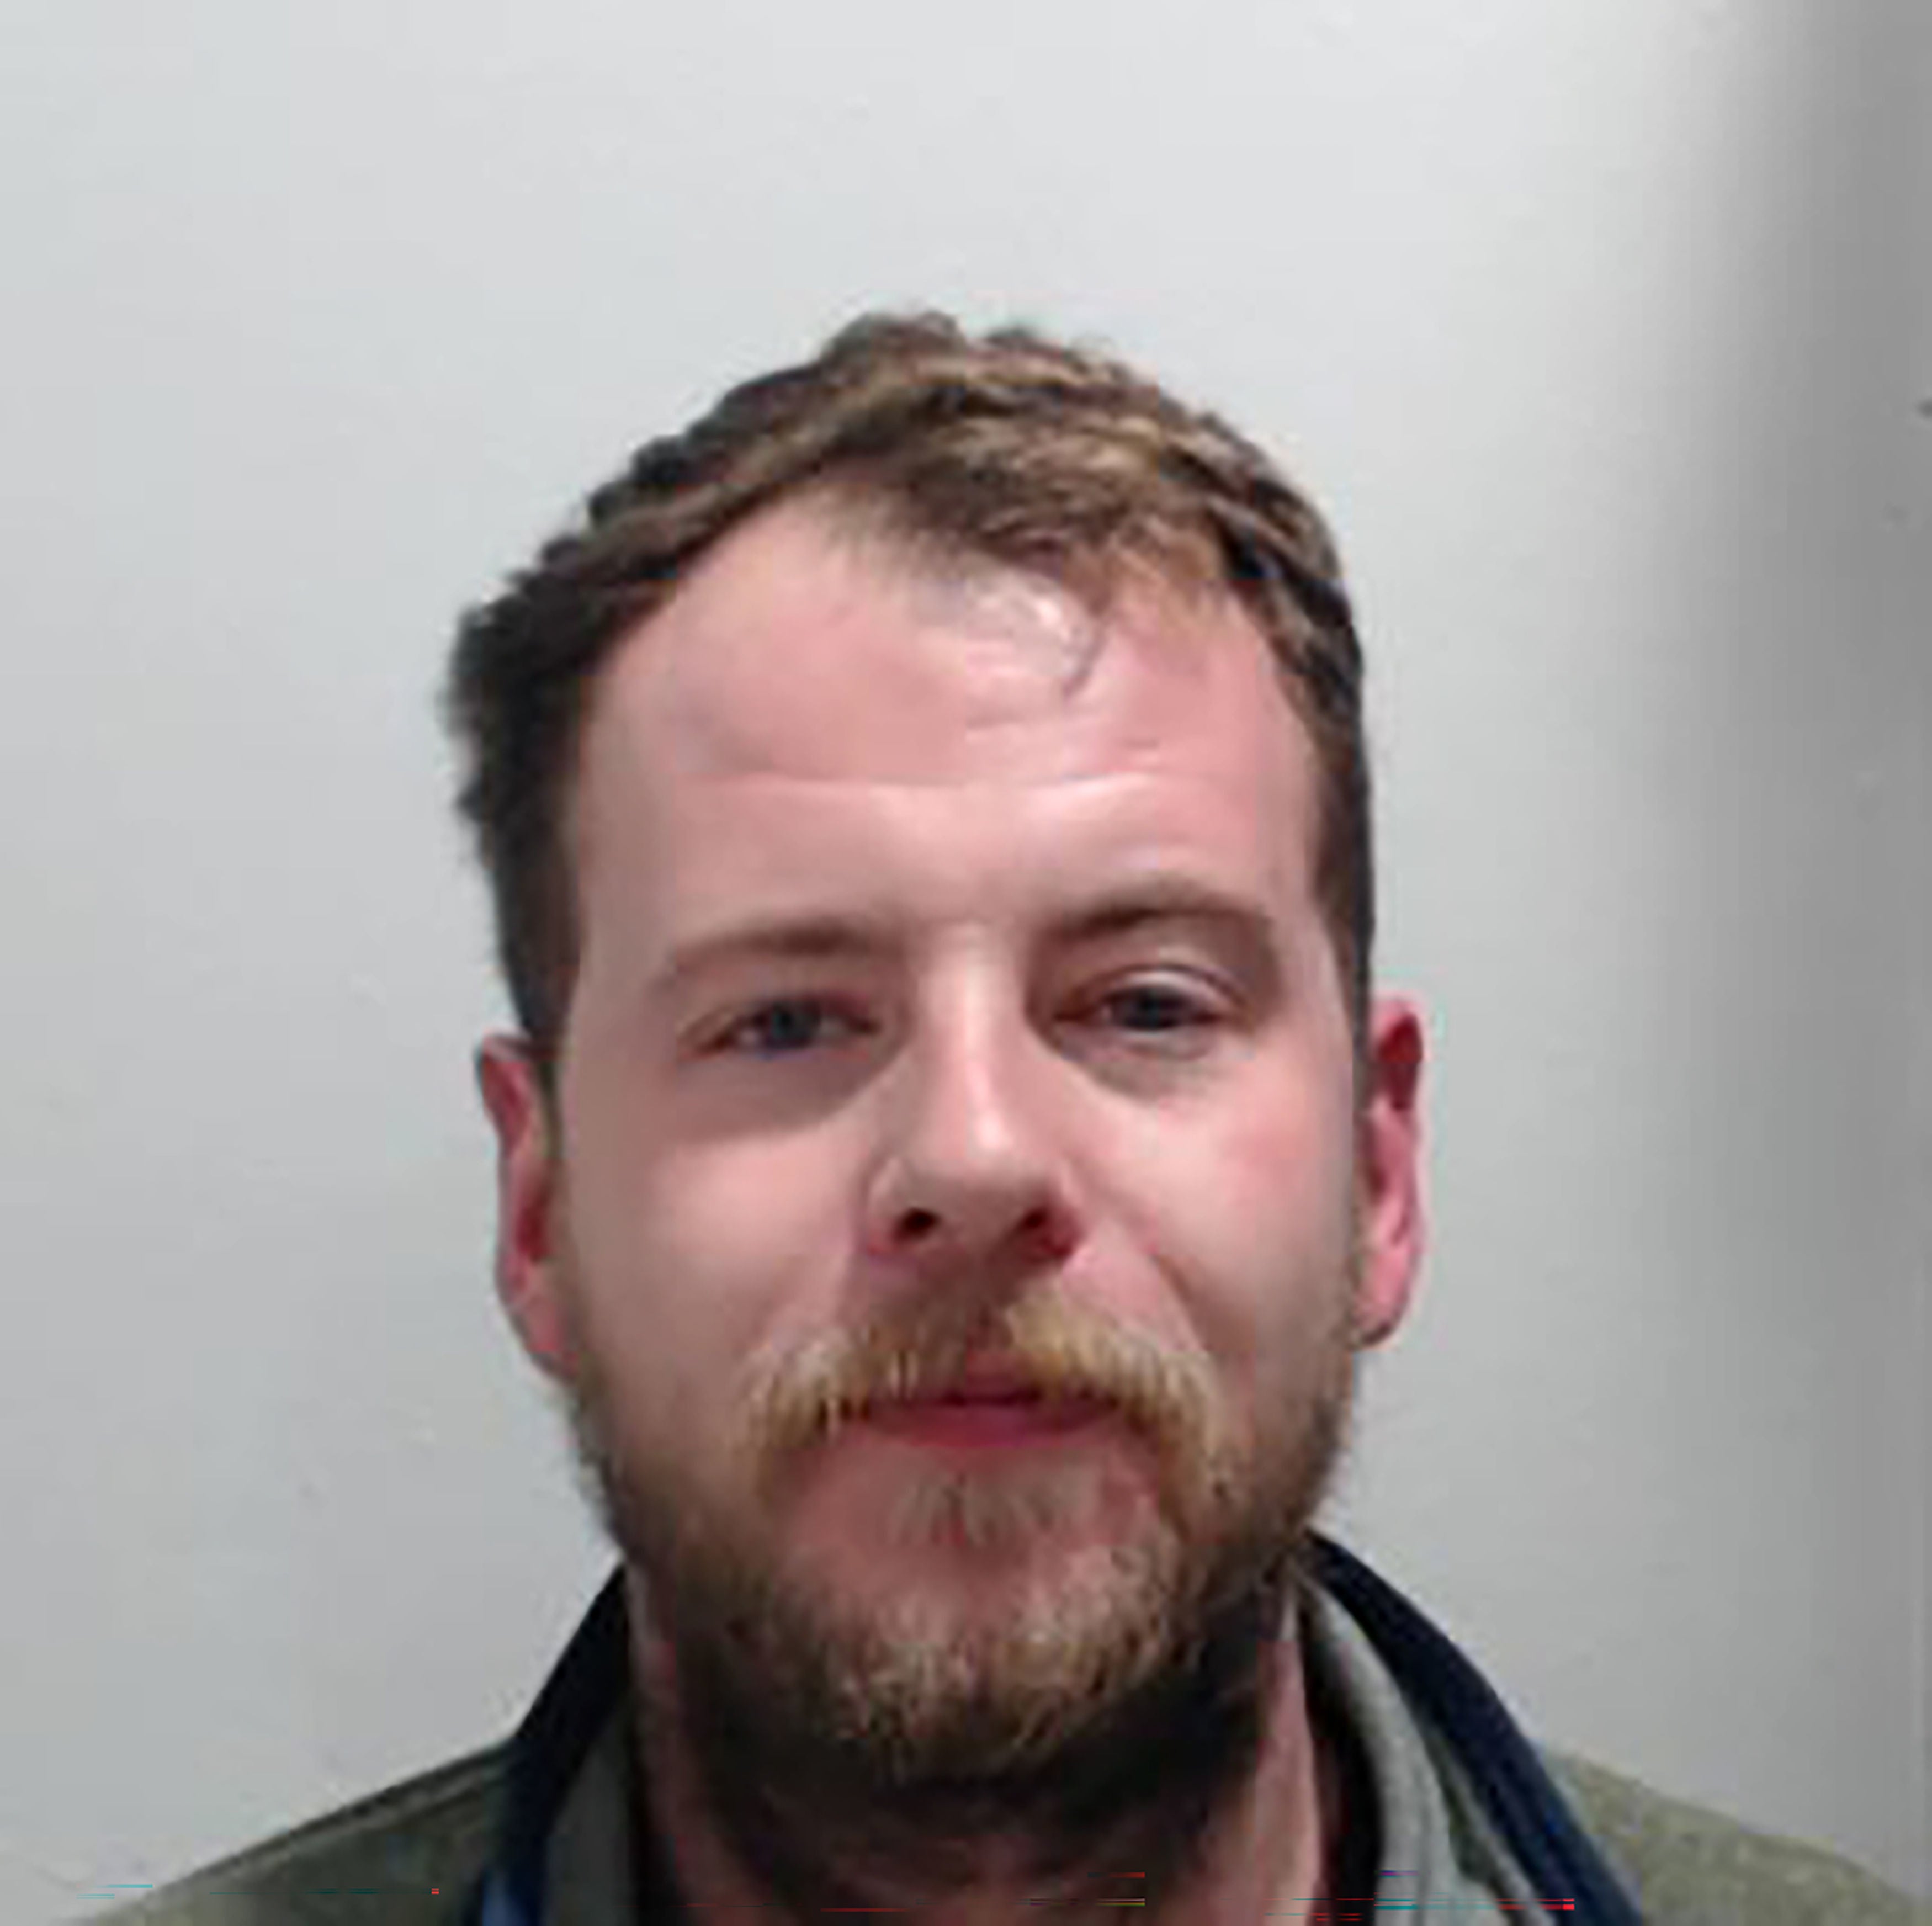 Alexander McKellar who pleaded guilty to culpable homicide and attempting to pervert the course of justice